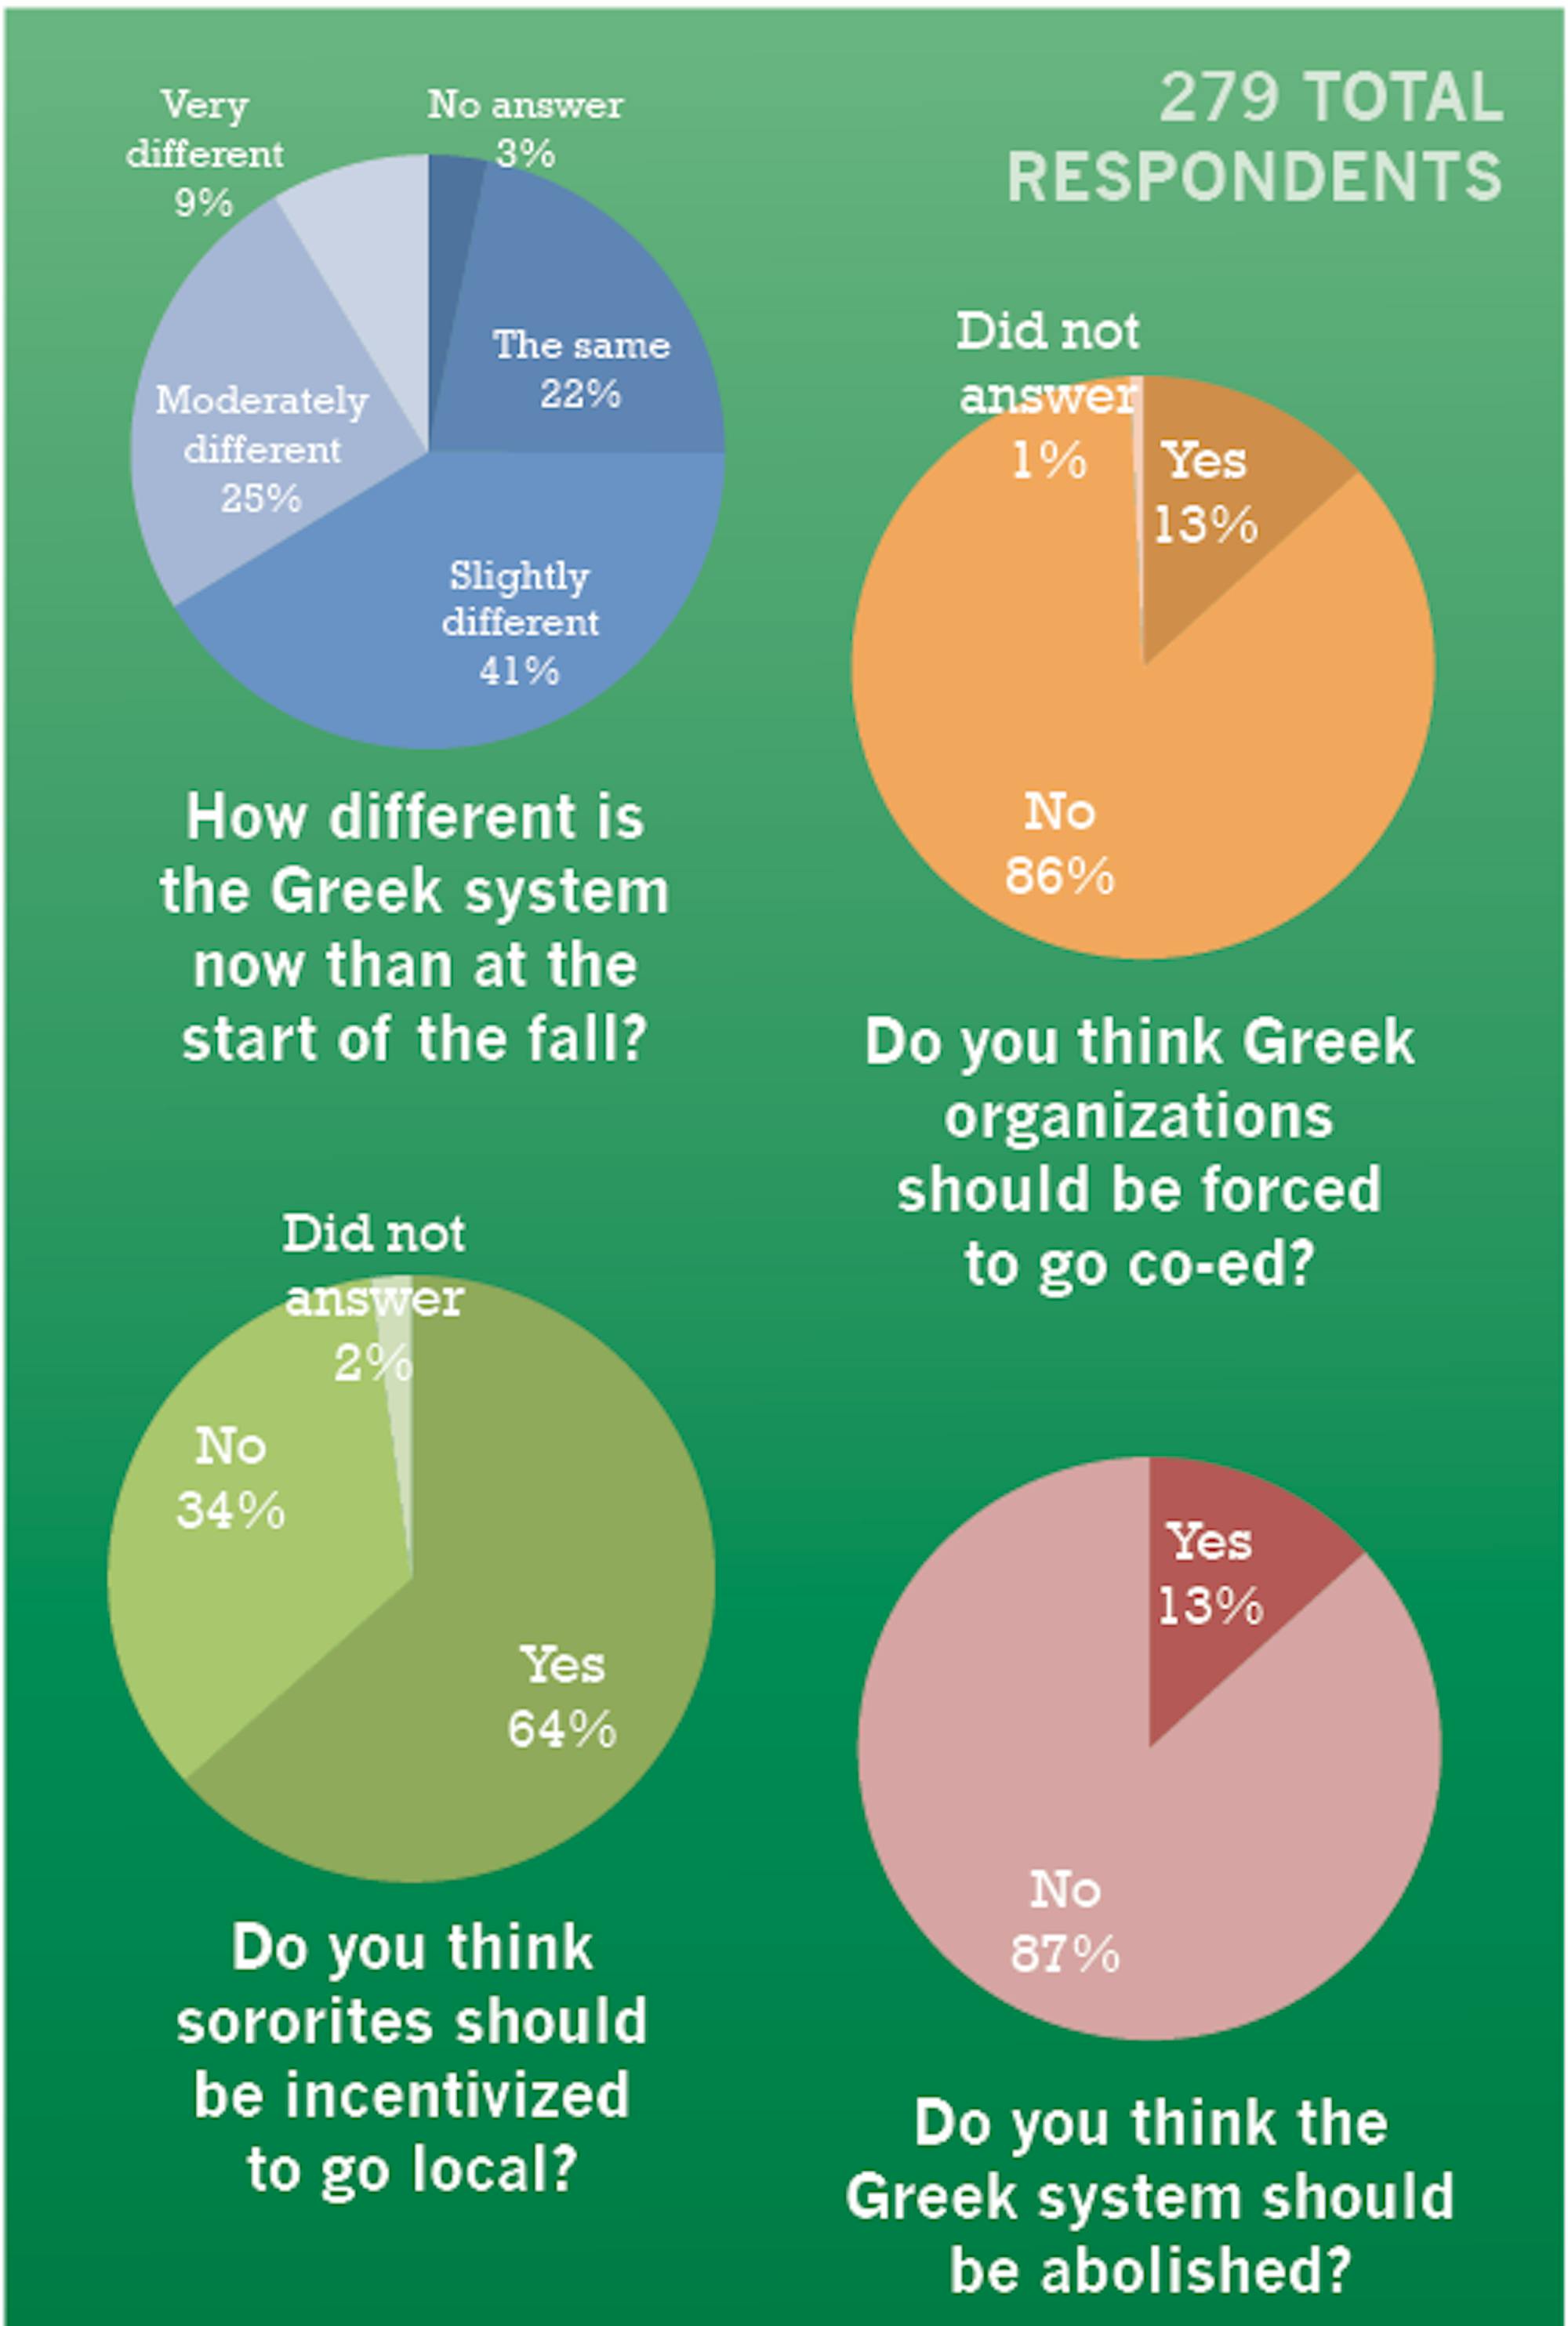 In a survey The Dartmouth emailed campus Monday morning, students overwhelmingly expressed support for the Greek system as it stands. 